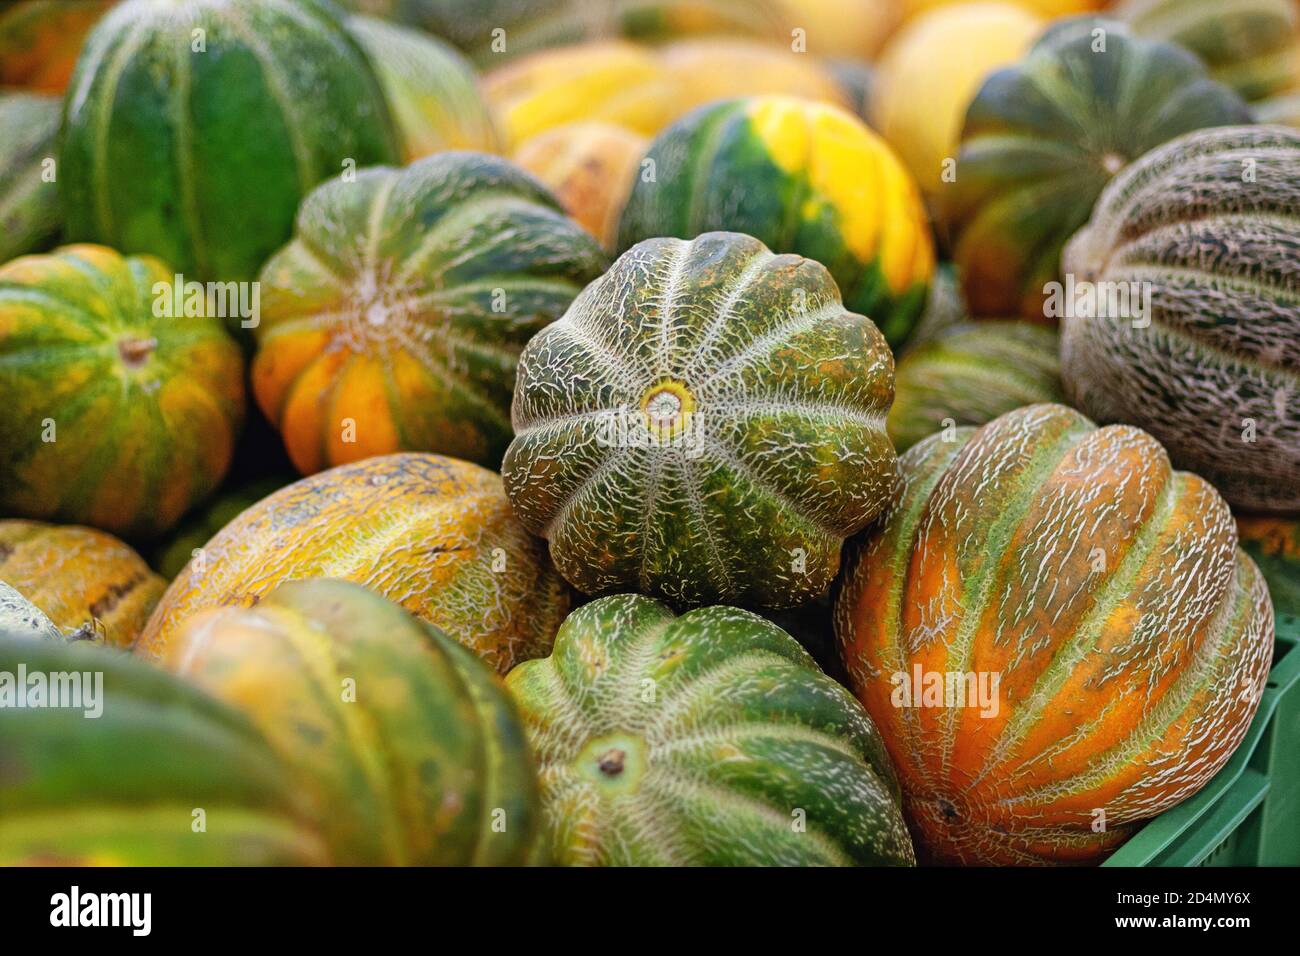 pile of ripe melons in supermarket Stock Photo